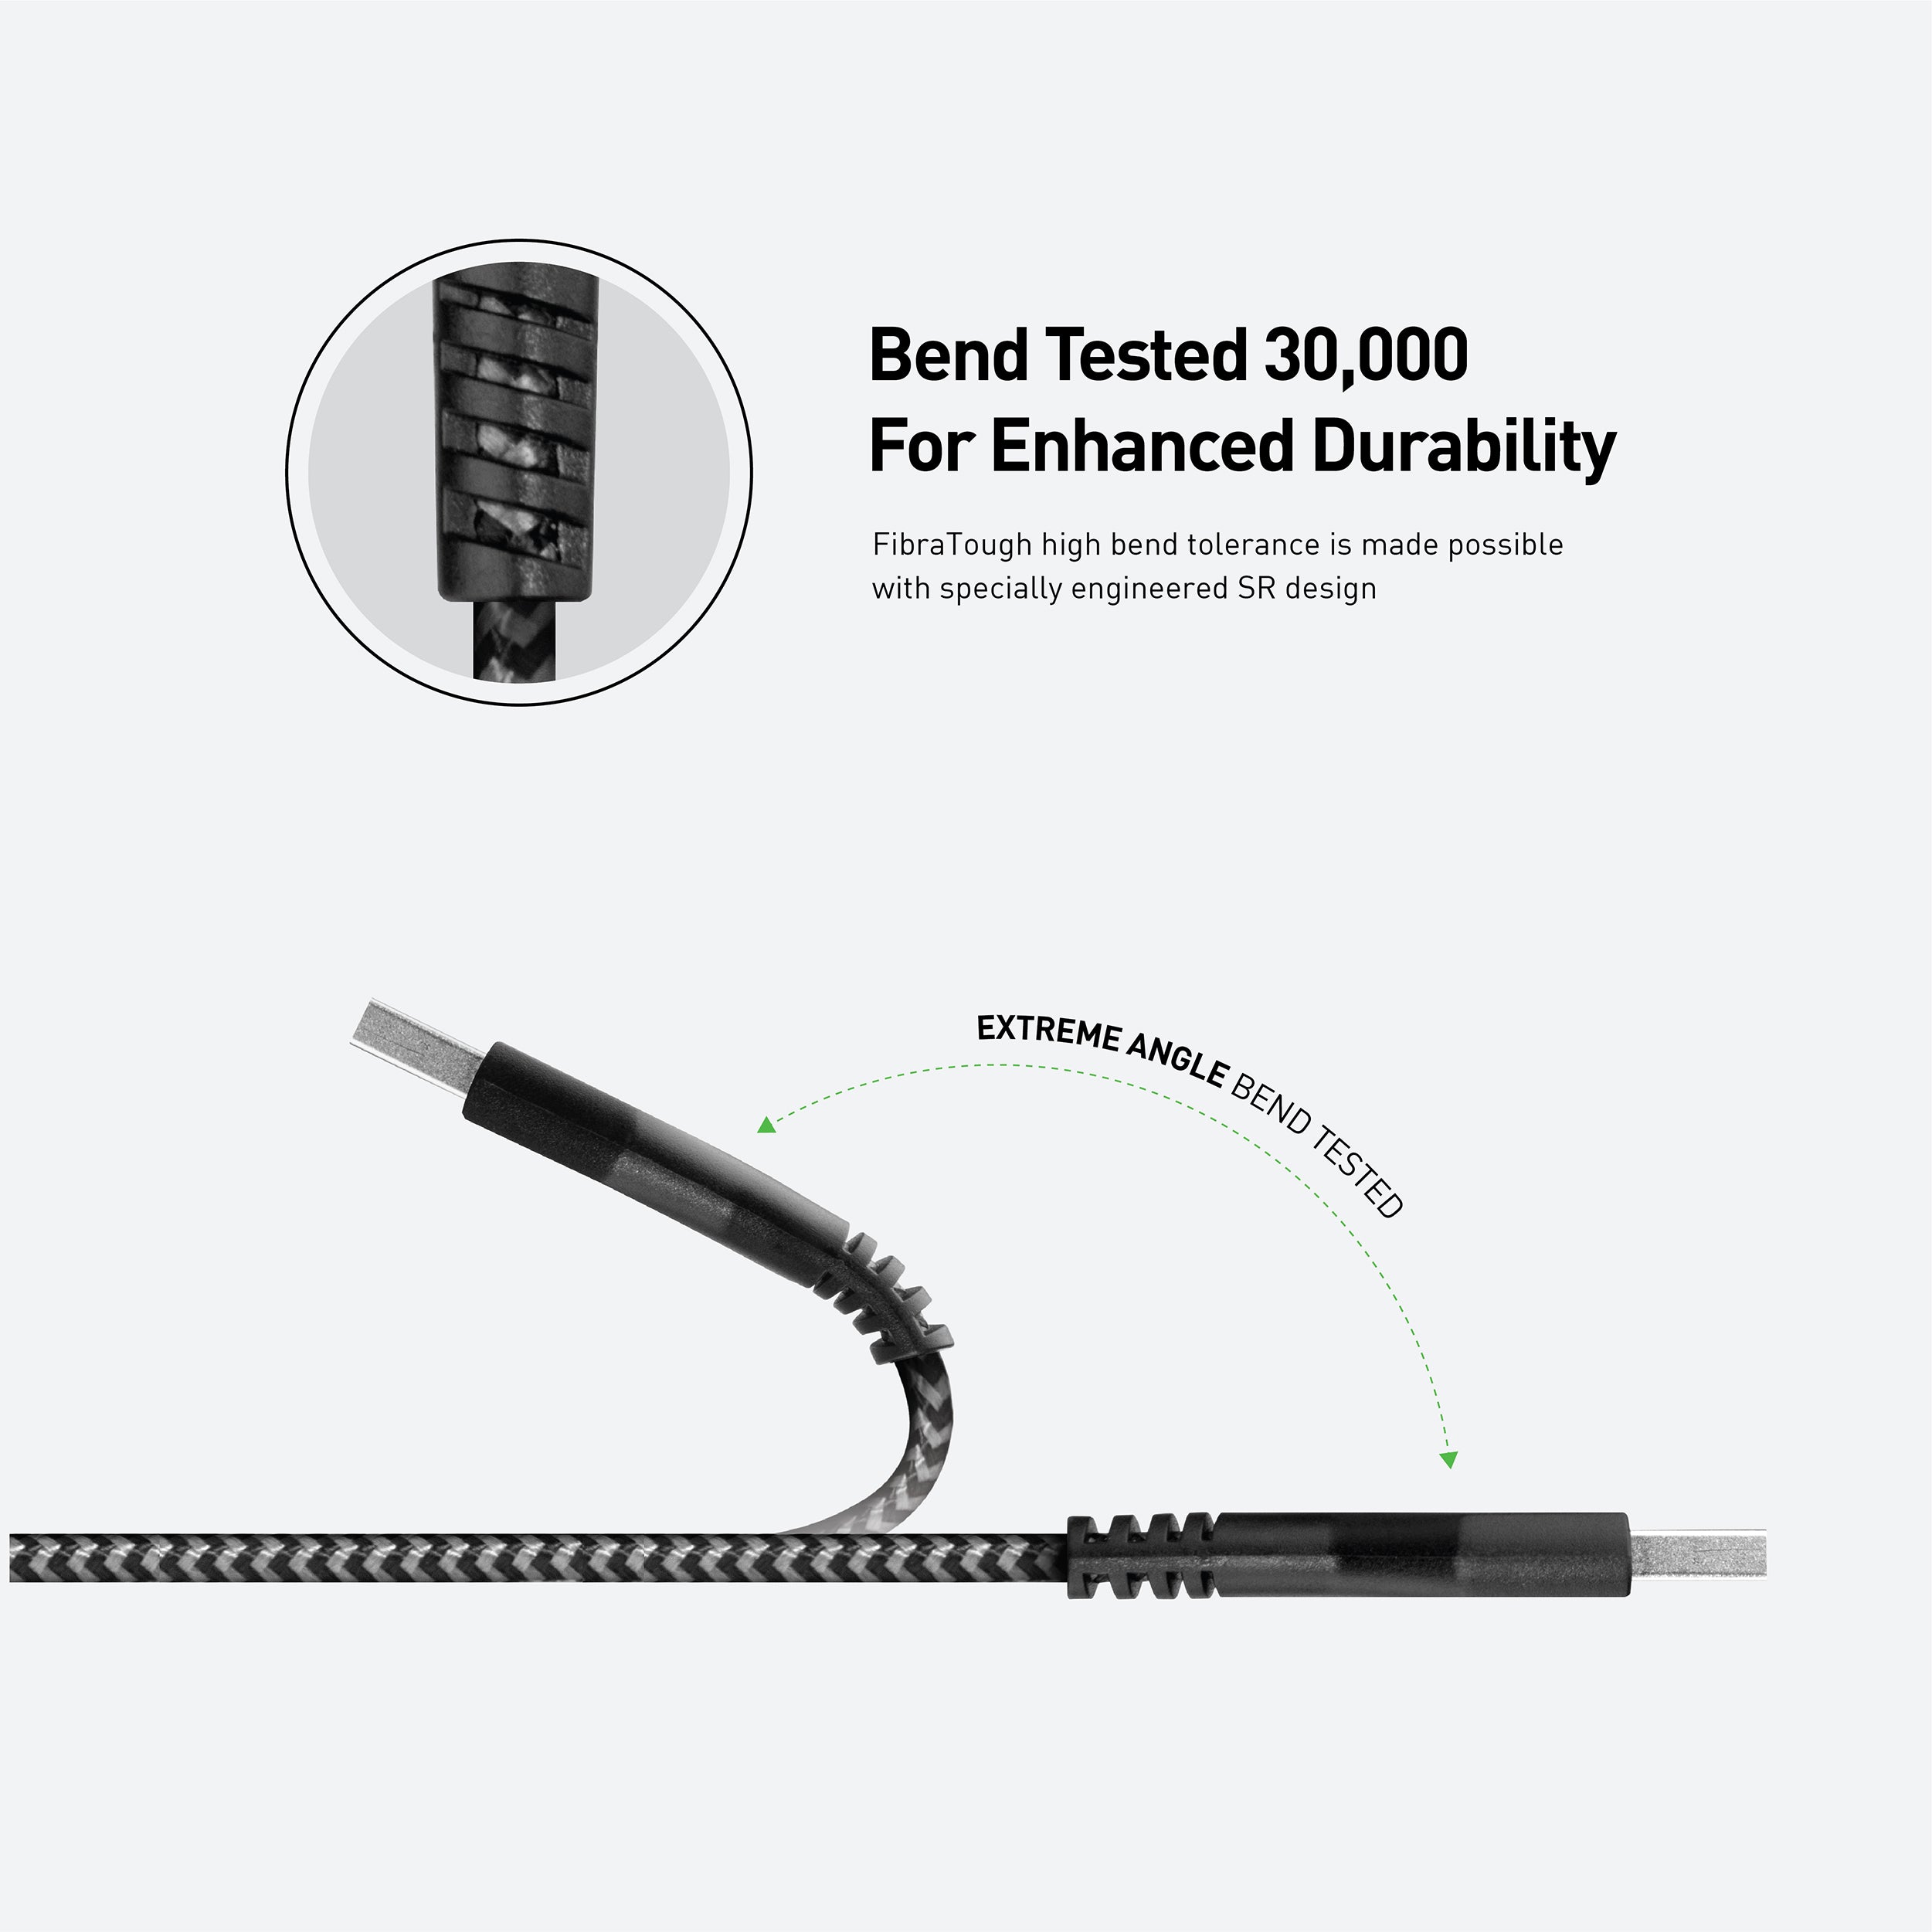 The image shows a FibraTough USB-C cable with the text "bend tested for enhanced durability" indicating its increased strength.